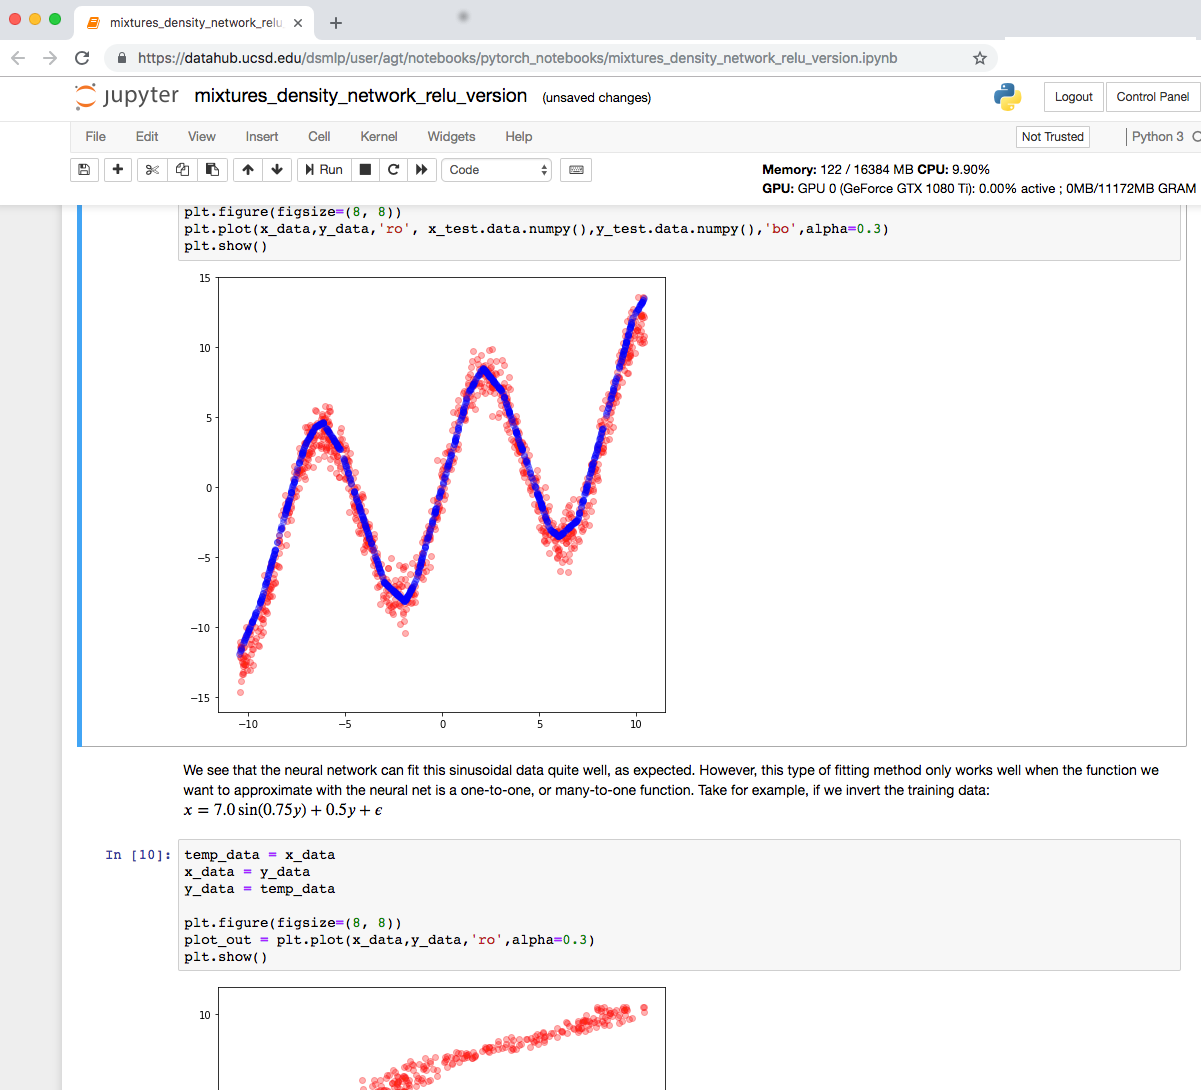 Screen shot of a Jupyter notebook illustrating embedded graphs (low resolution/detail)